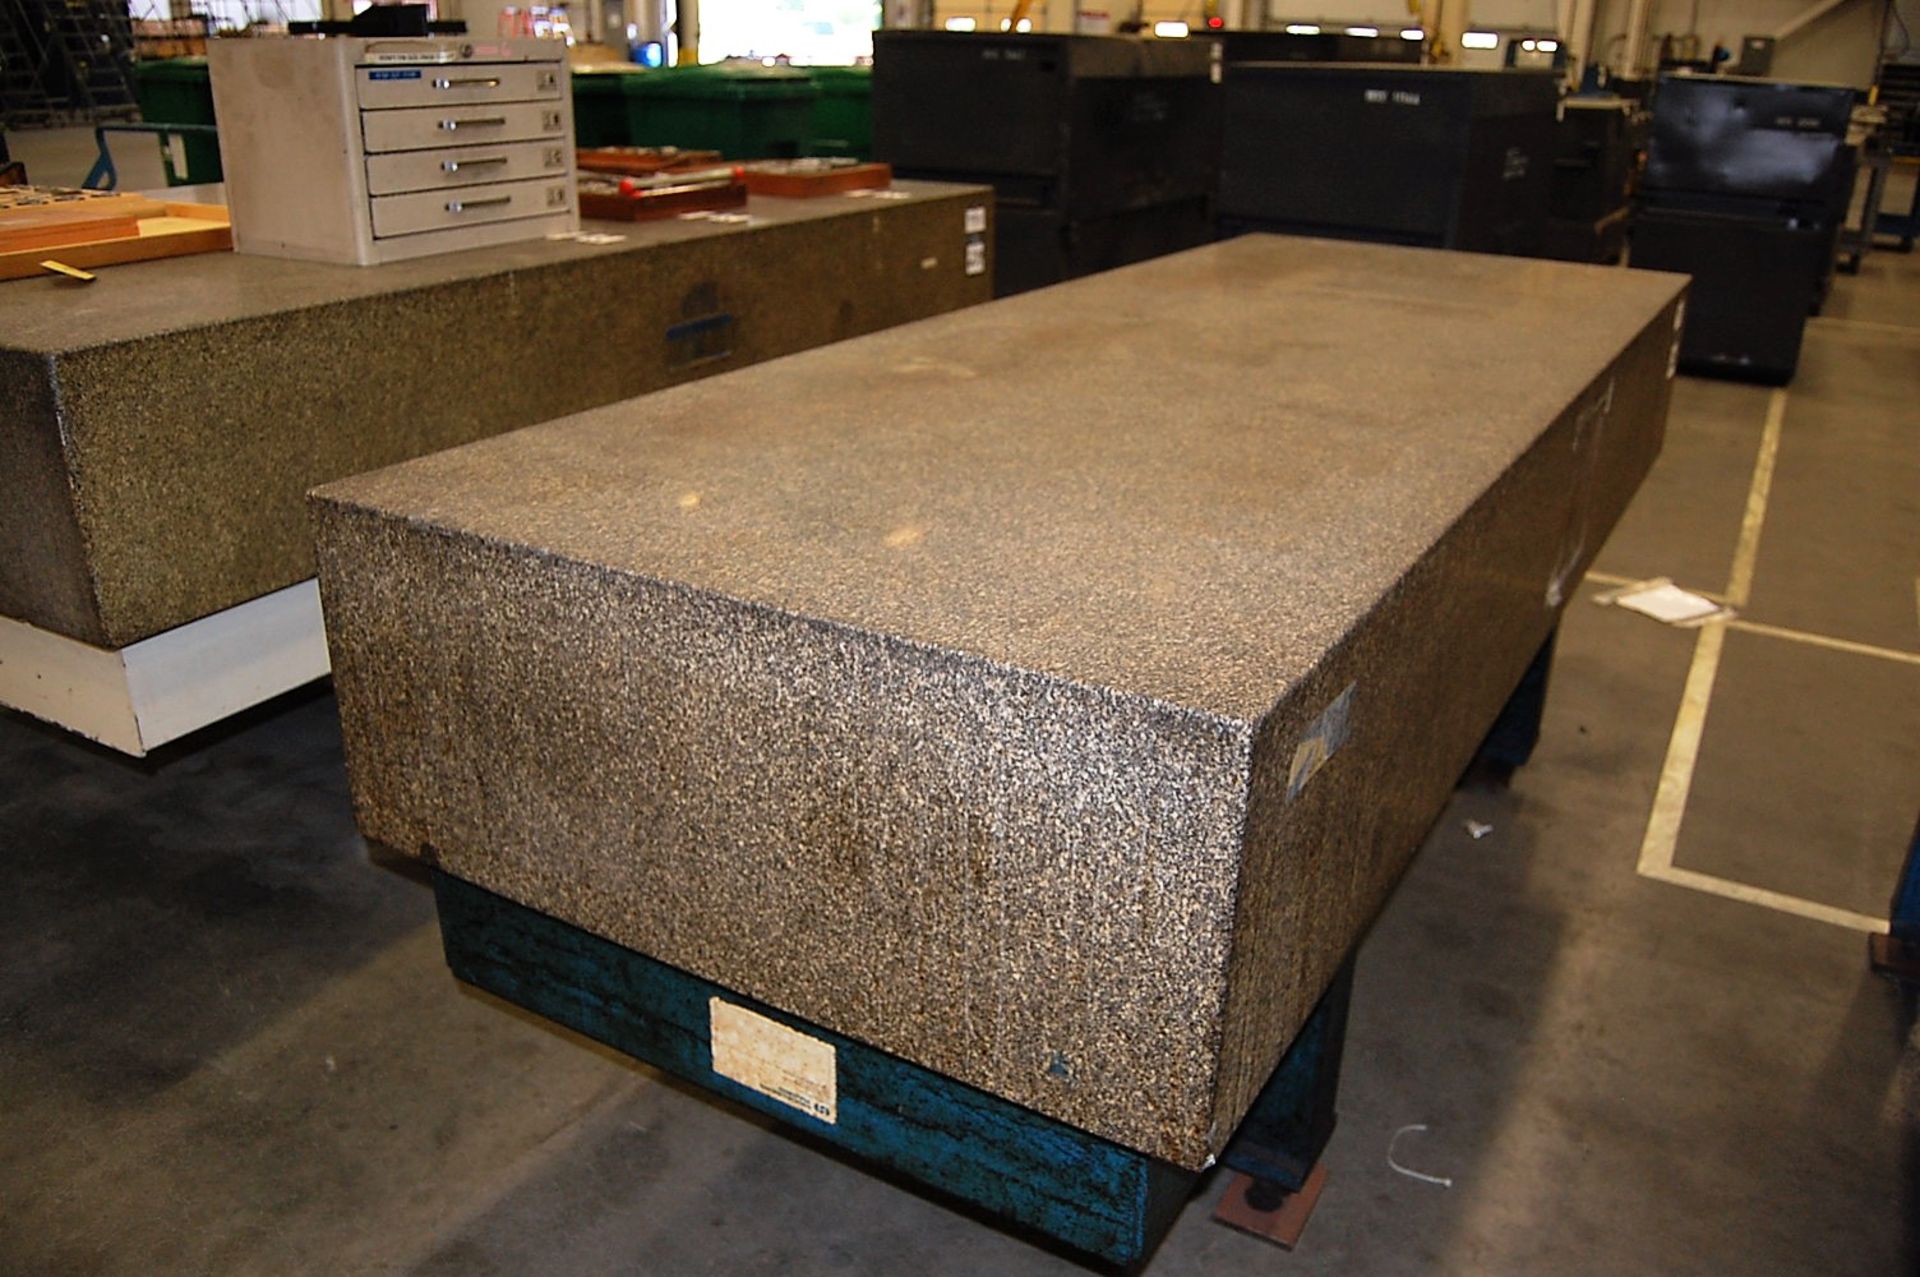 36" x 96" x 14" Granite Surface Plate - Image 3 of 3